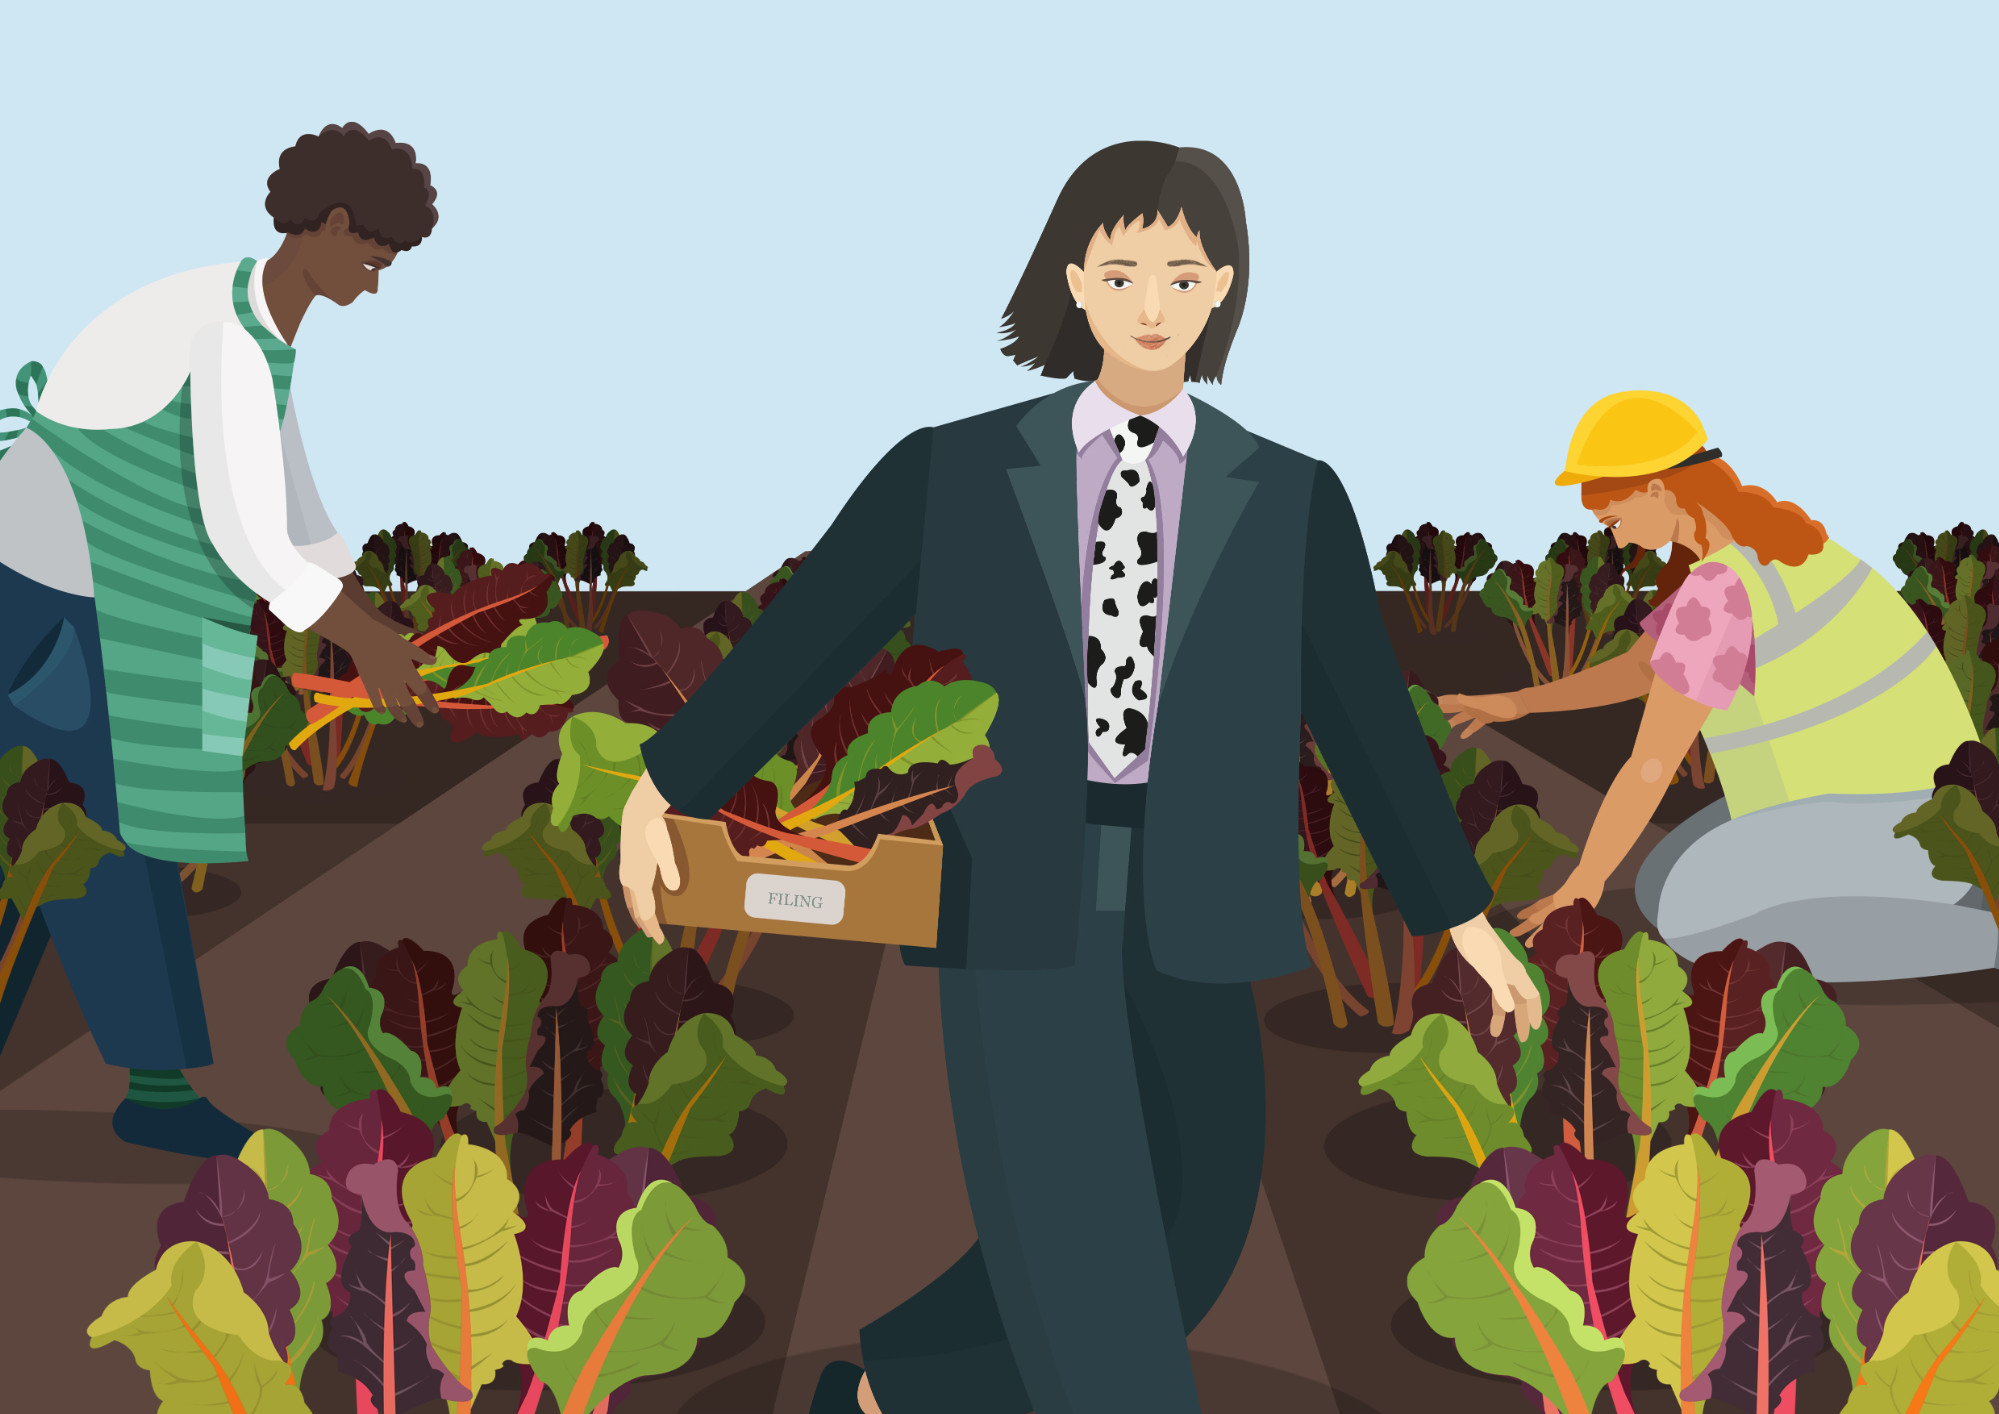 Illustration for an editorial piece based on an article in BBC News, encouraging furloughed workers to become fruit and vegetable pickers during the Covid-19 outbreak. Isabella Richardson.